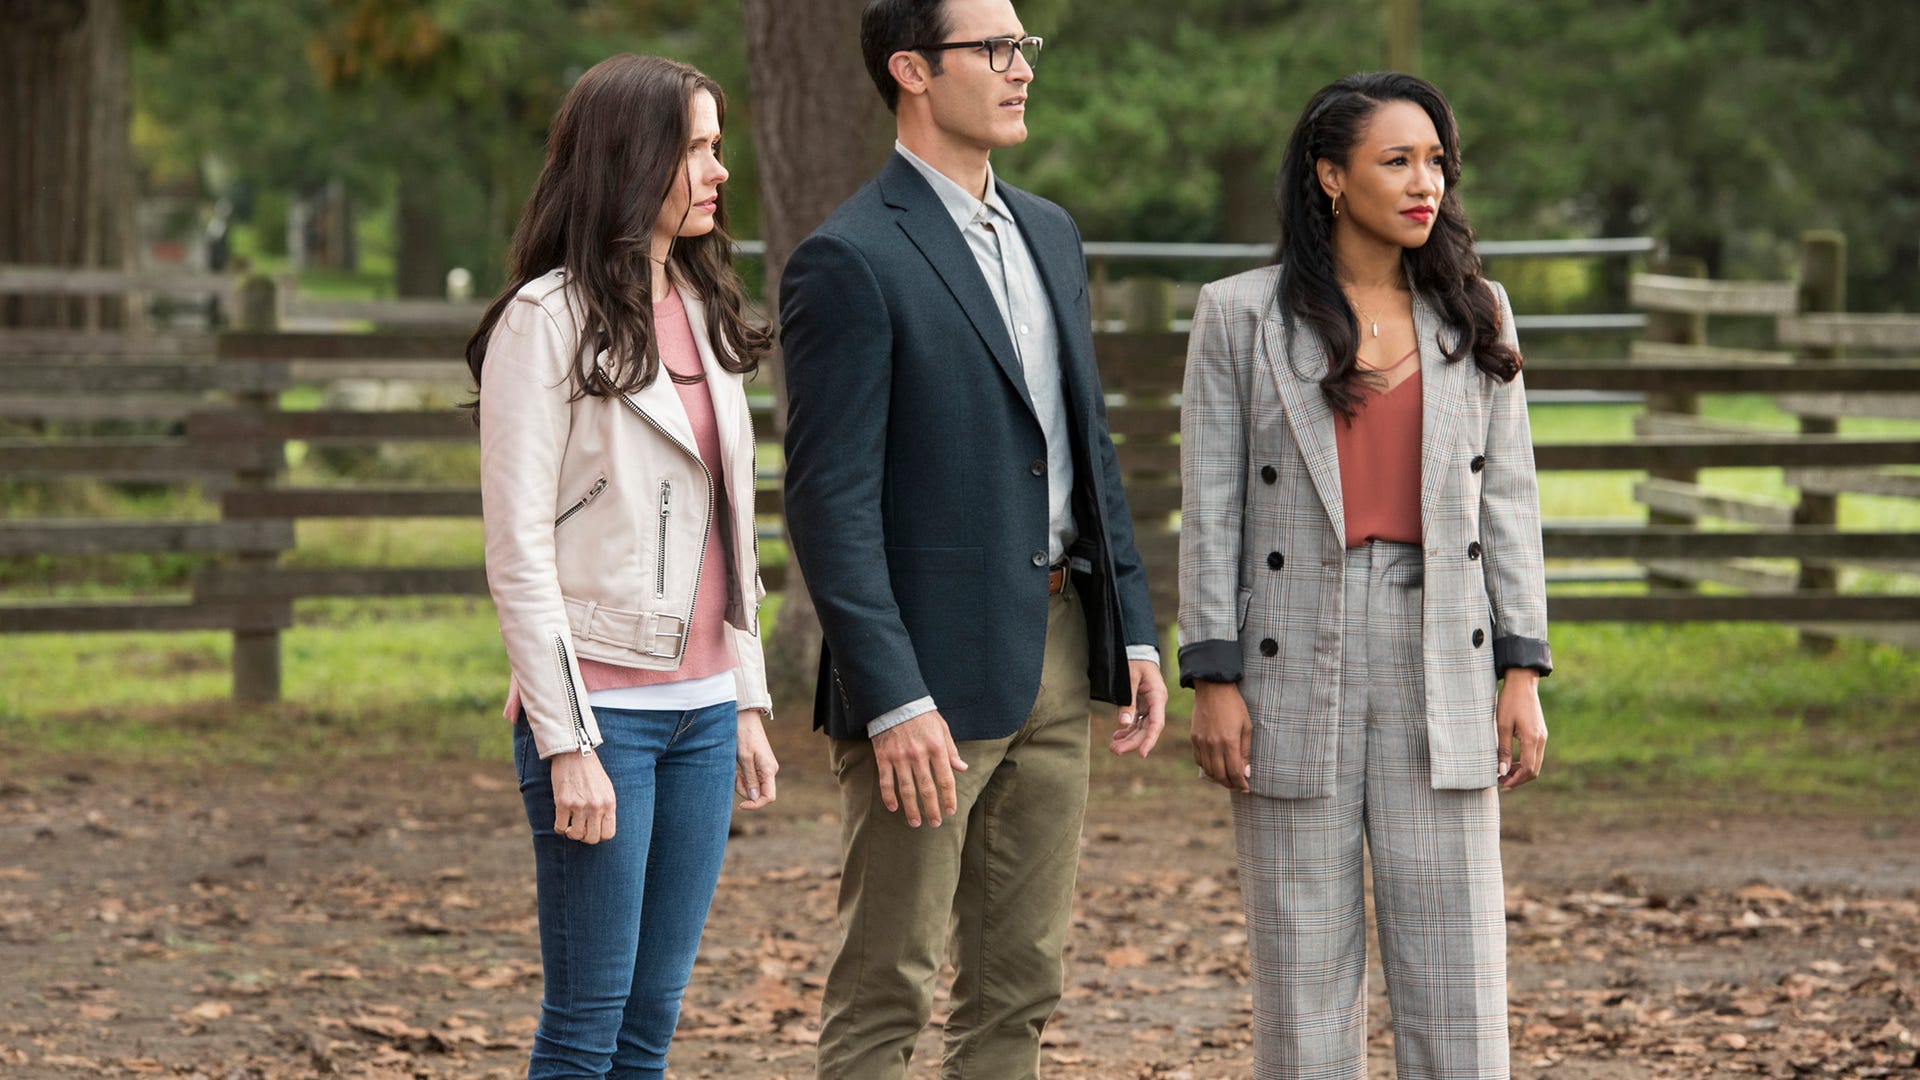 ​Tyler Hoechlin, Candice Patton, and Elizabeth Tulloch, Crisis on Infinite Earths